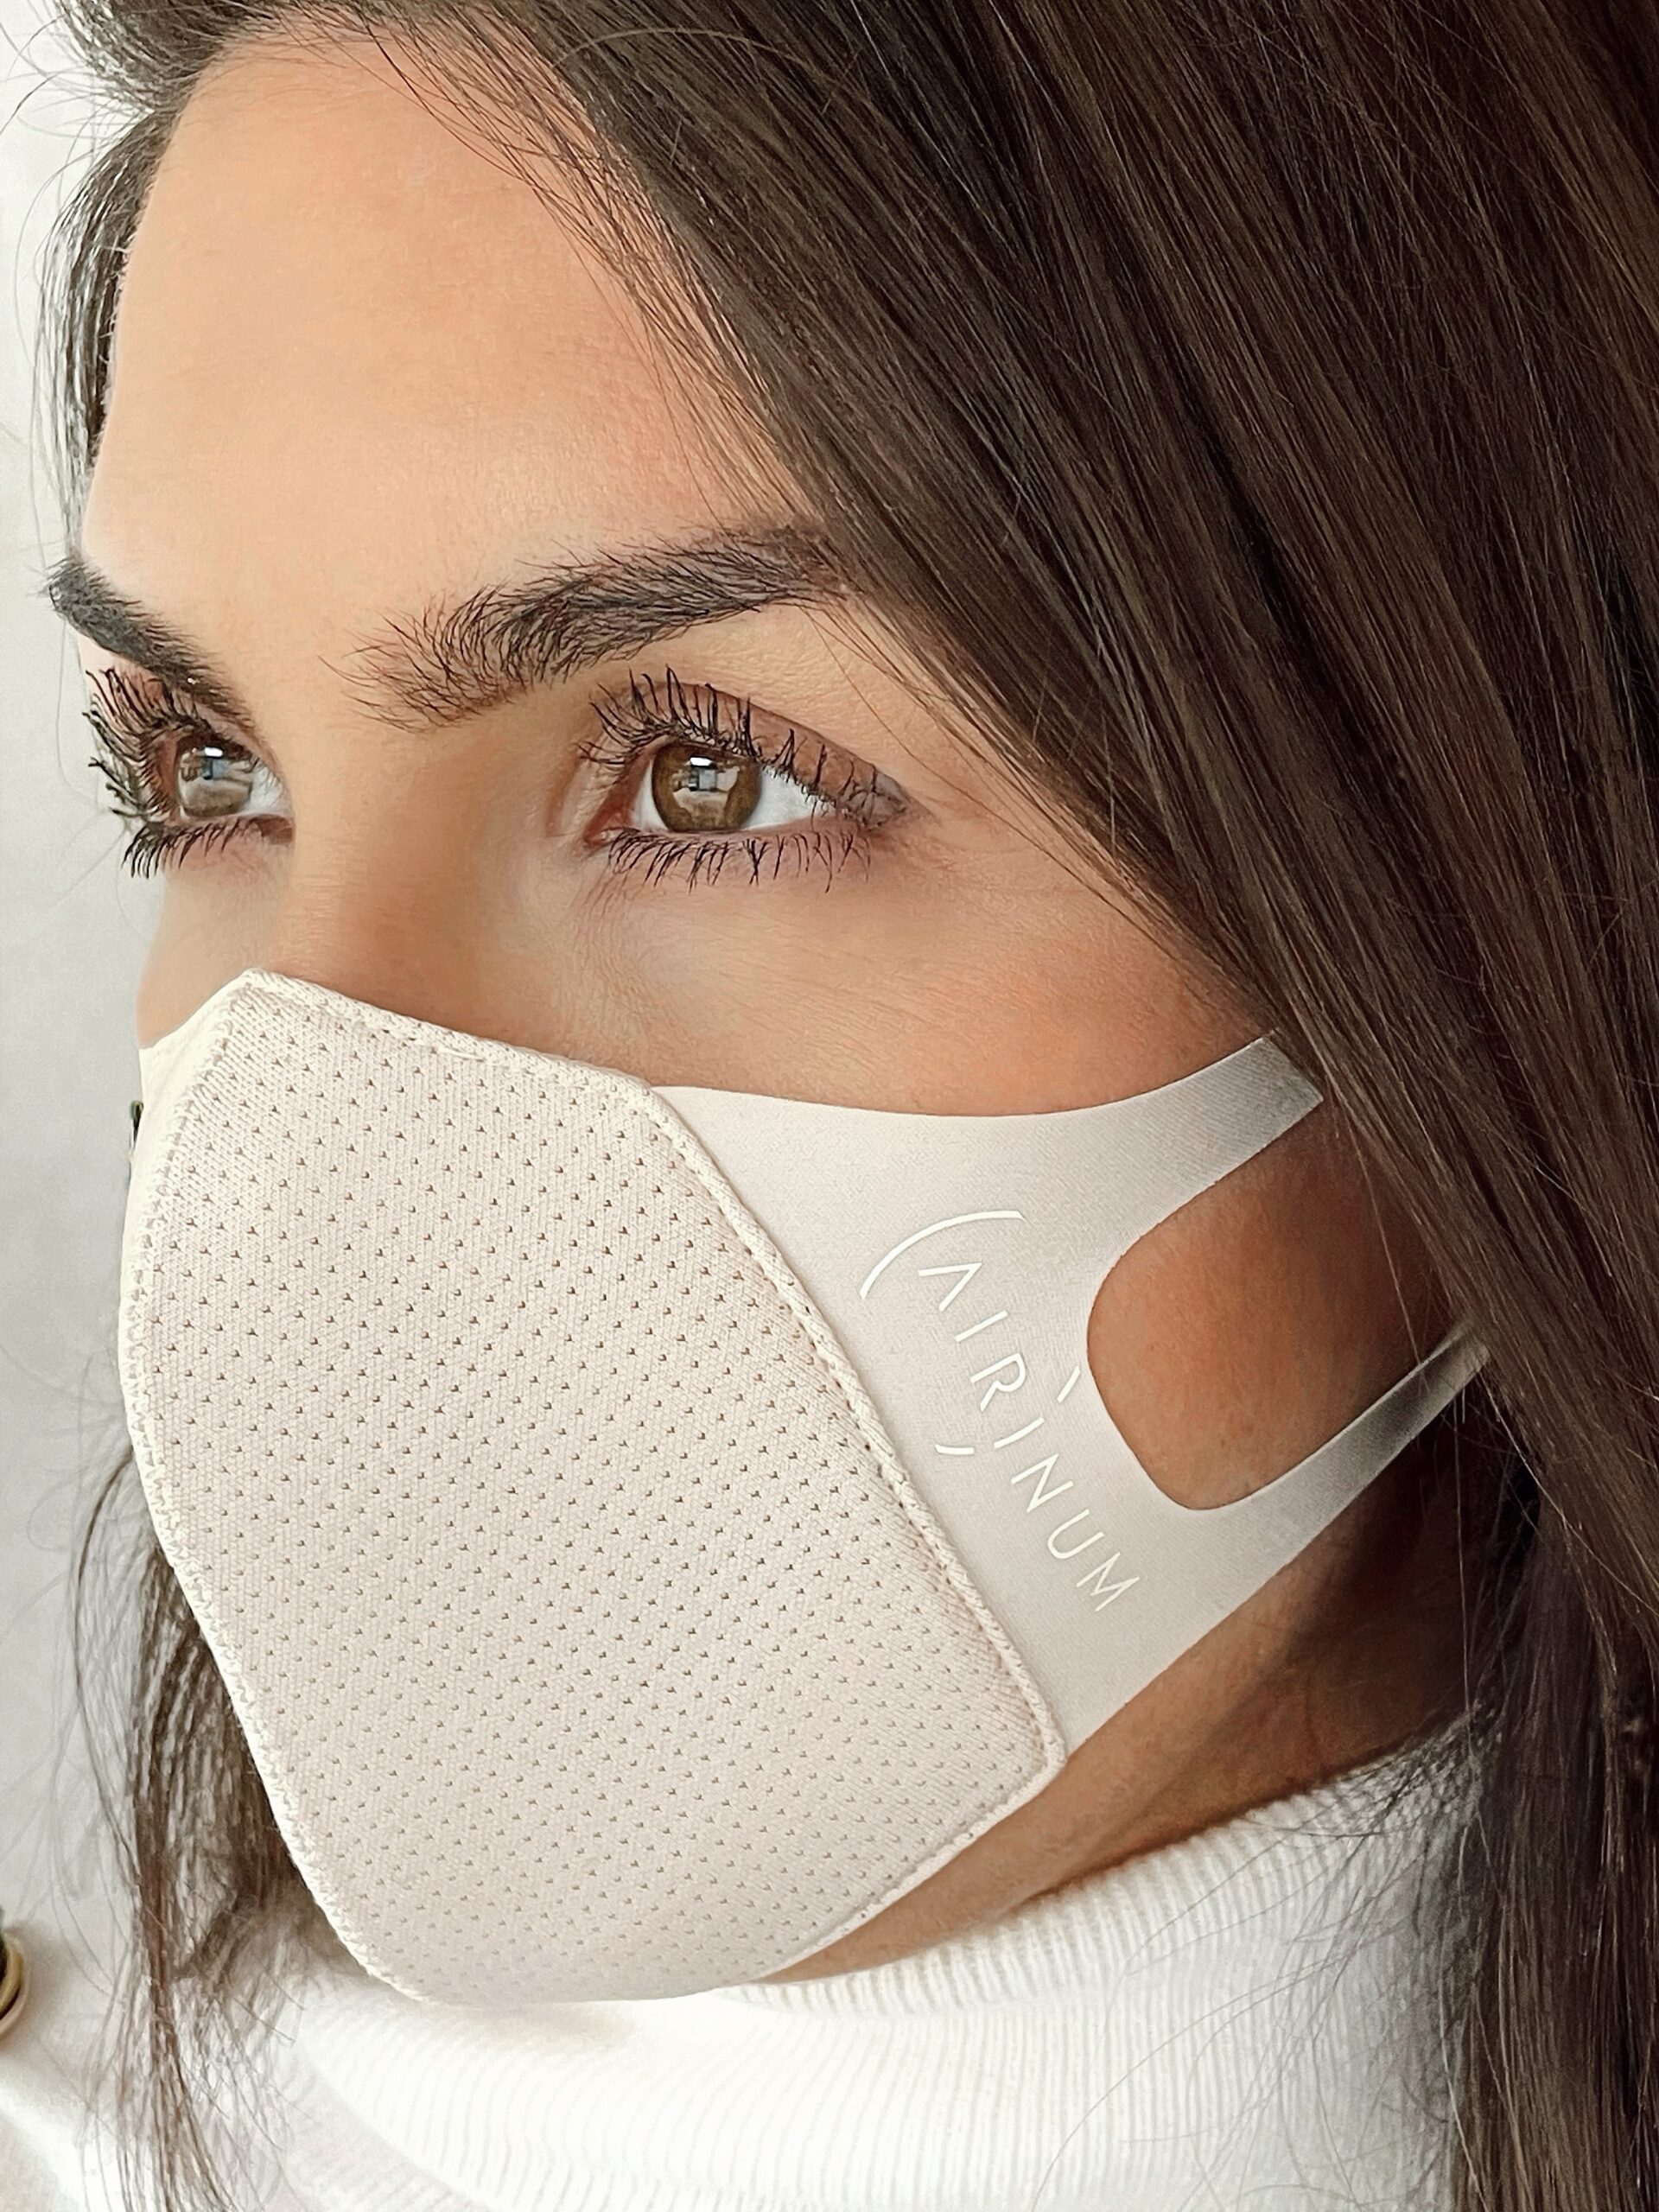 PROTECT AGAINST POLLUTION SUSTAINABLY – THE AIRNUM MASK